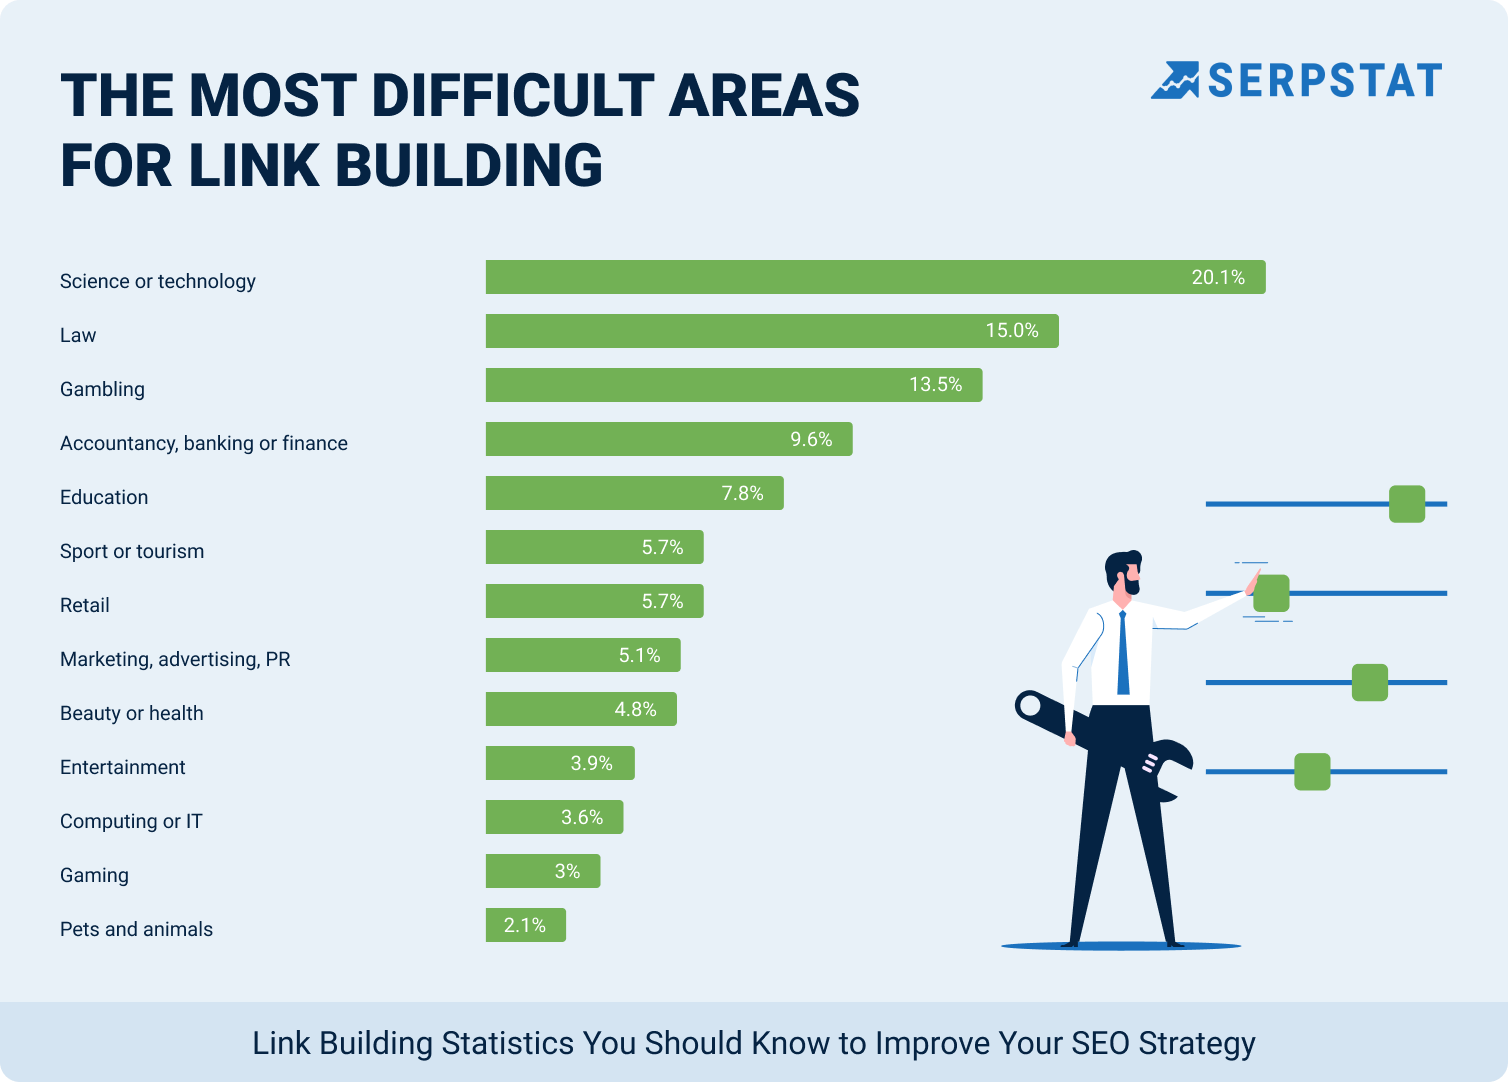 The most difficult areas for link building